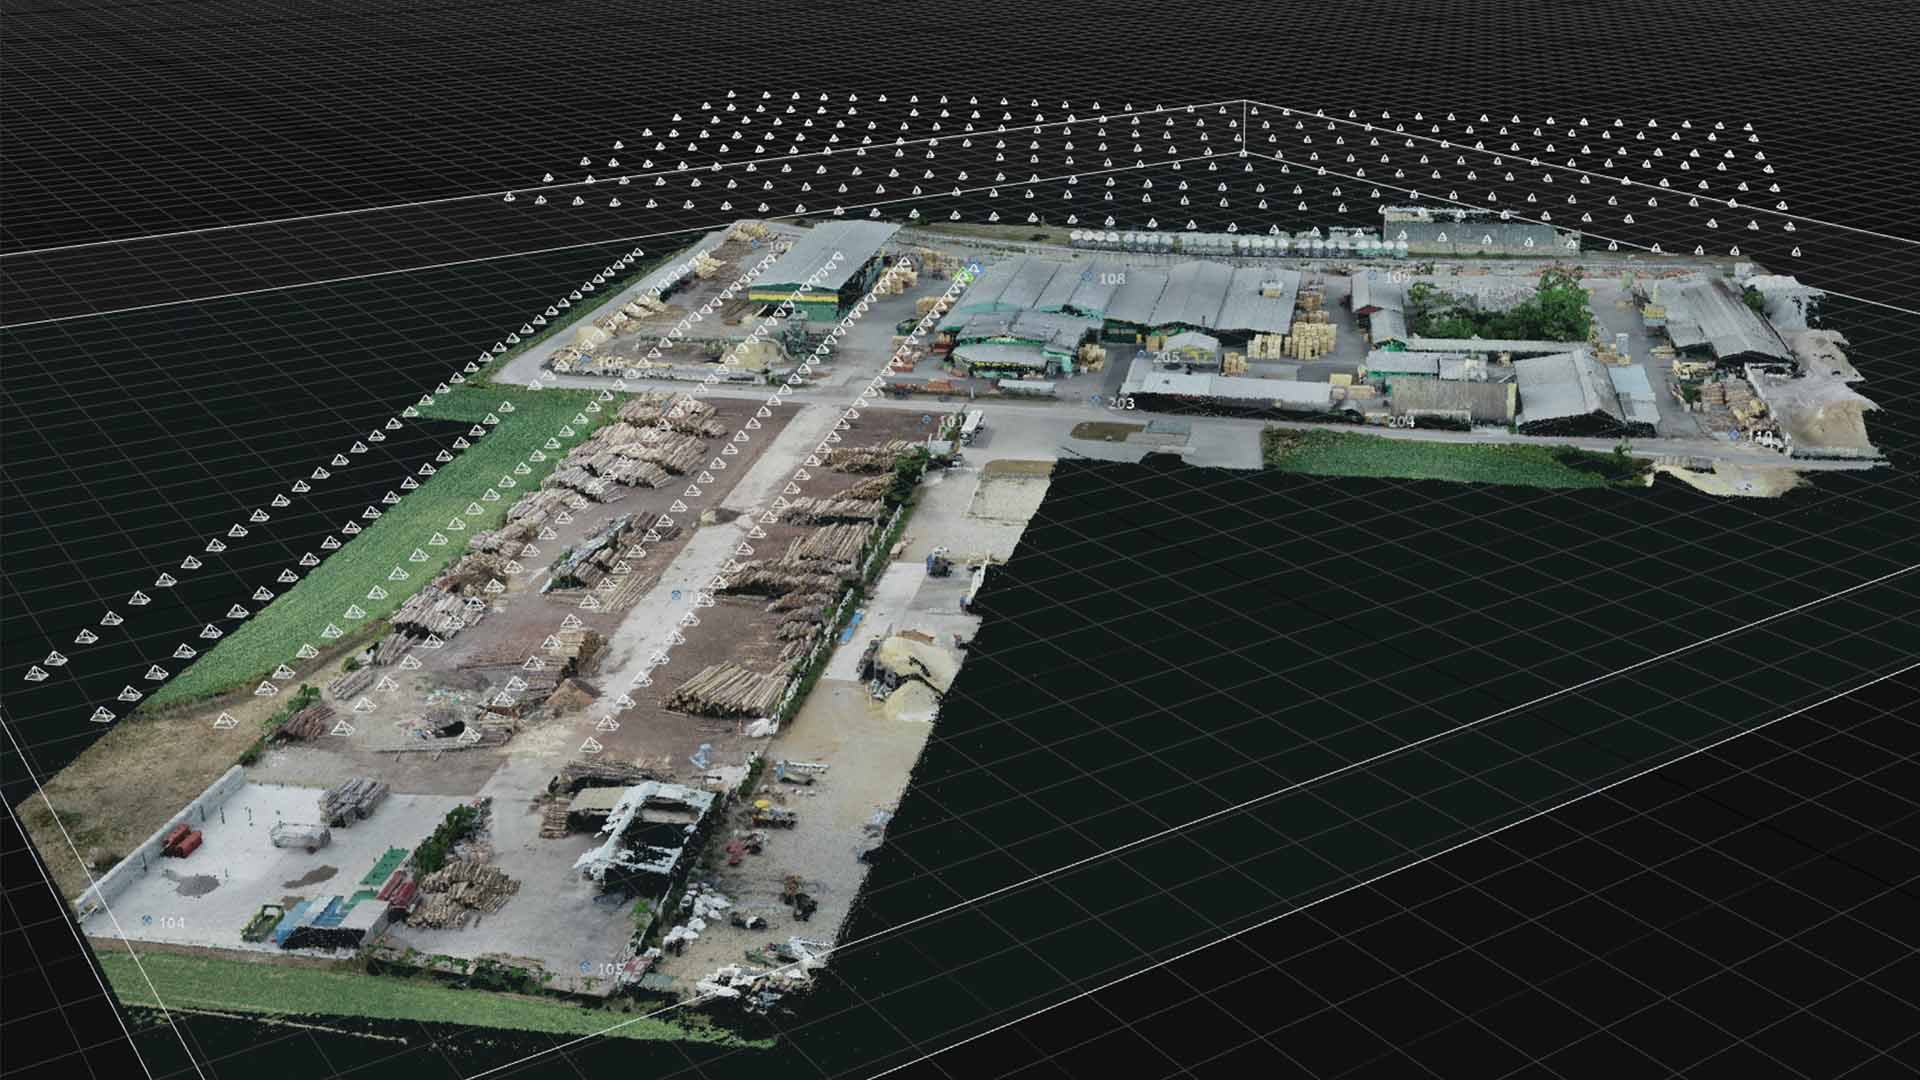 5 Crucial Factors in Selecting a Drone Mapping Service